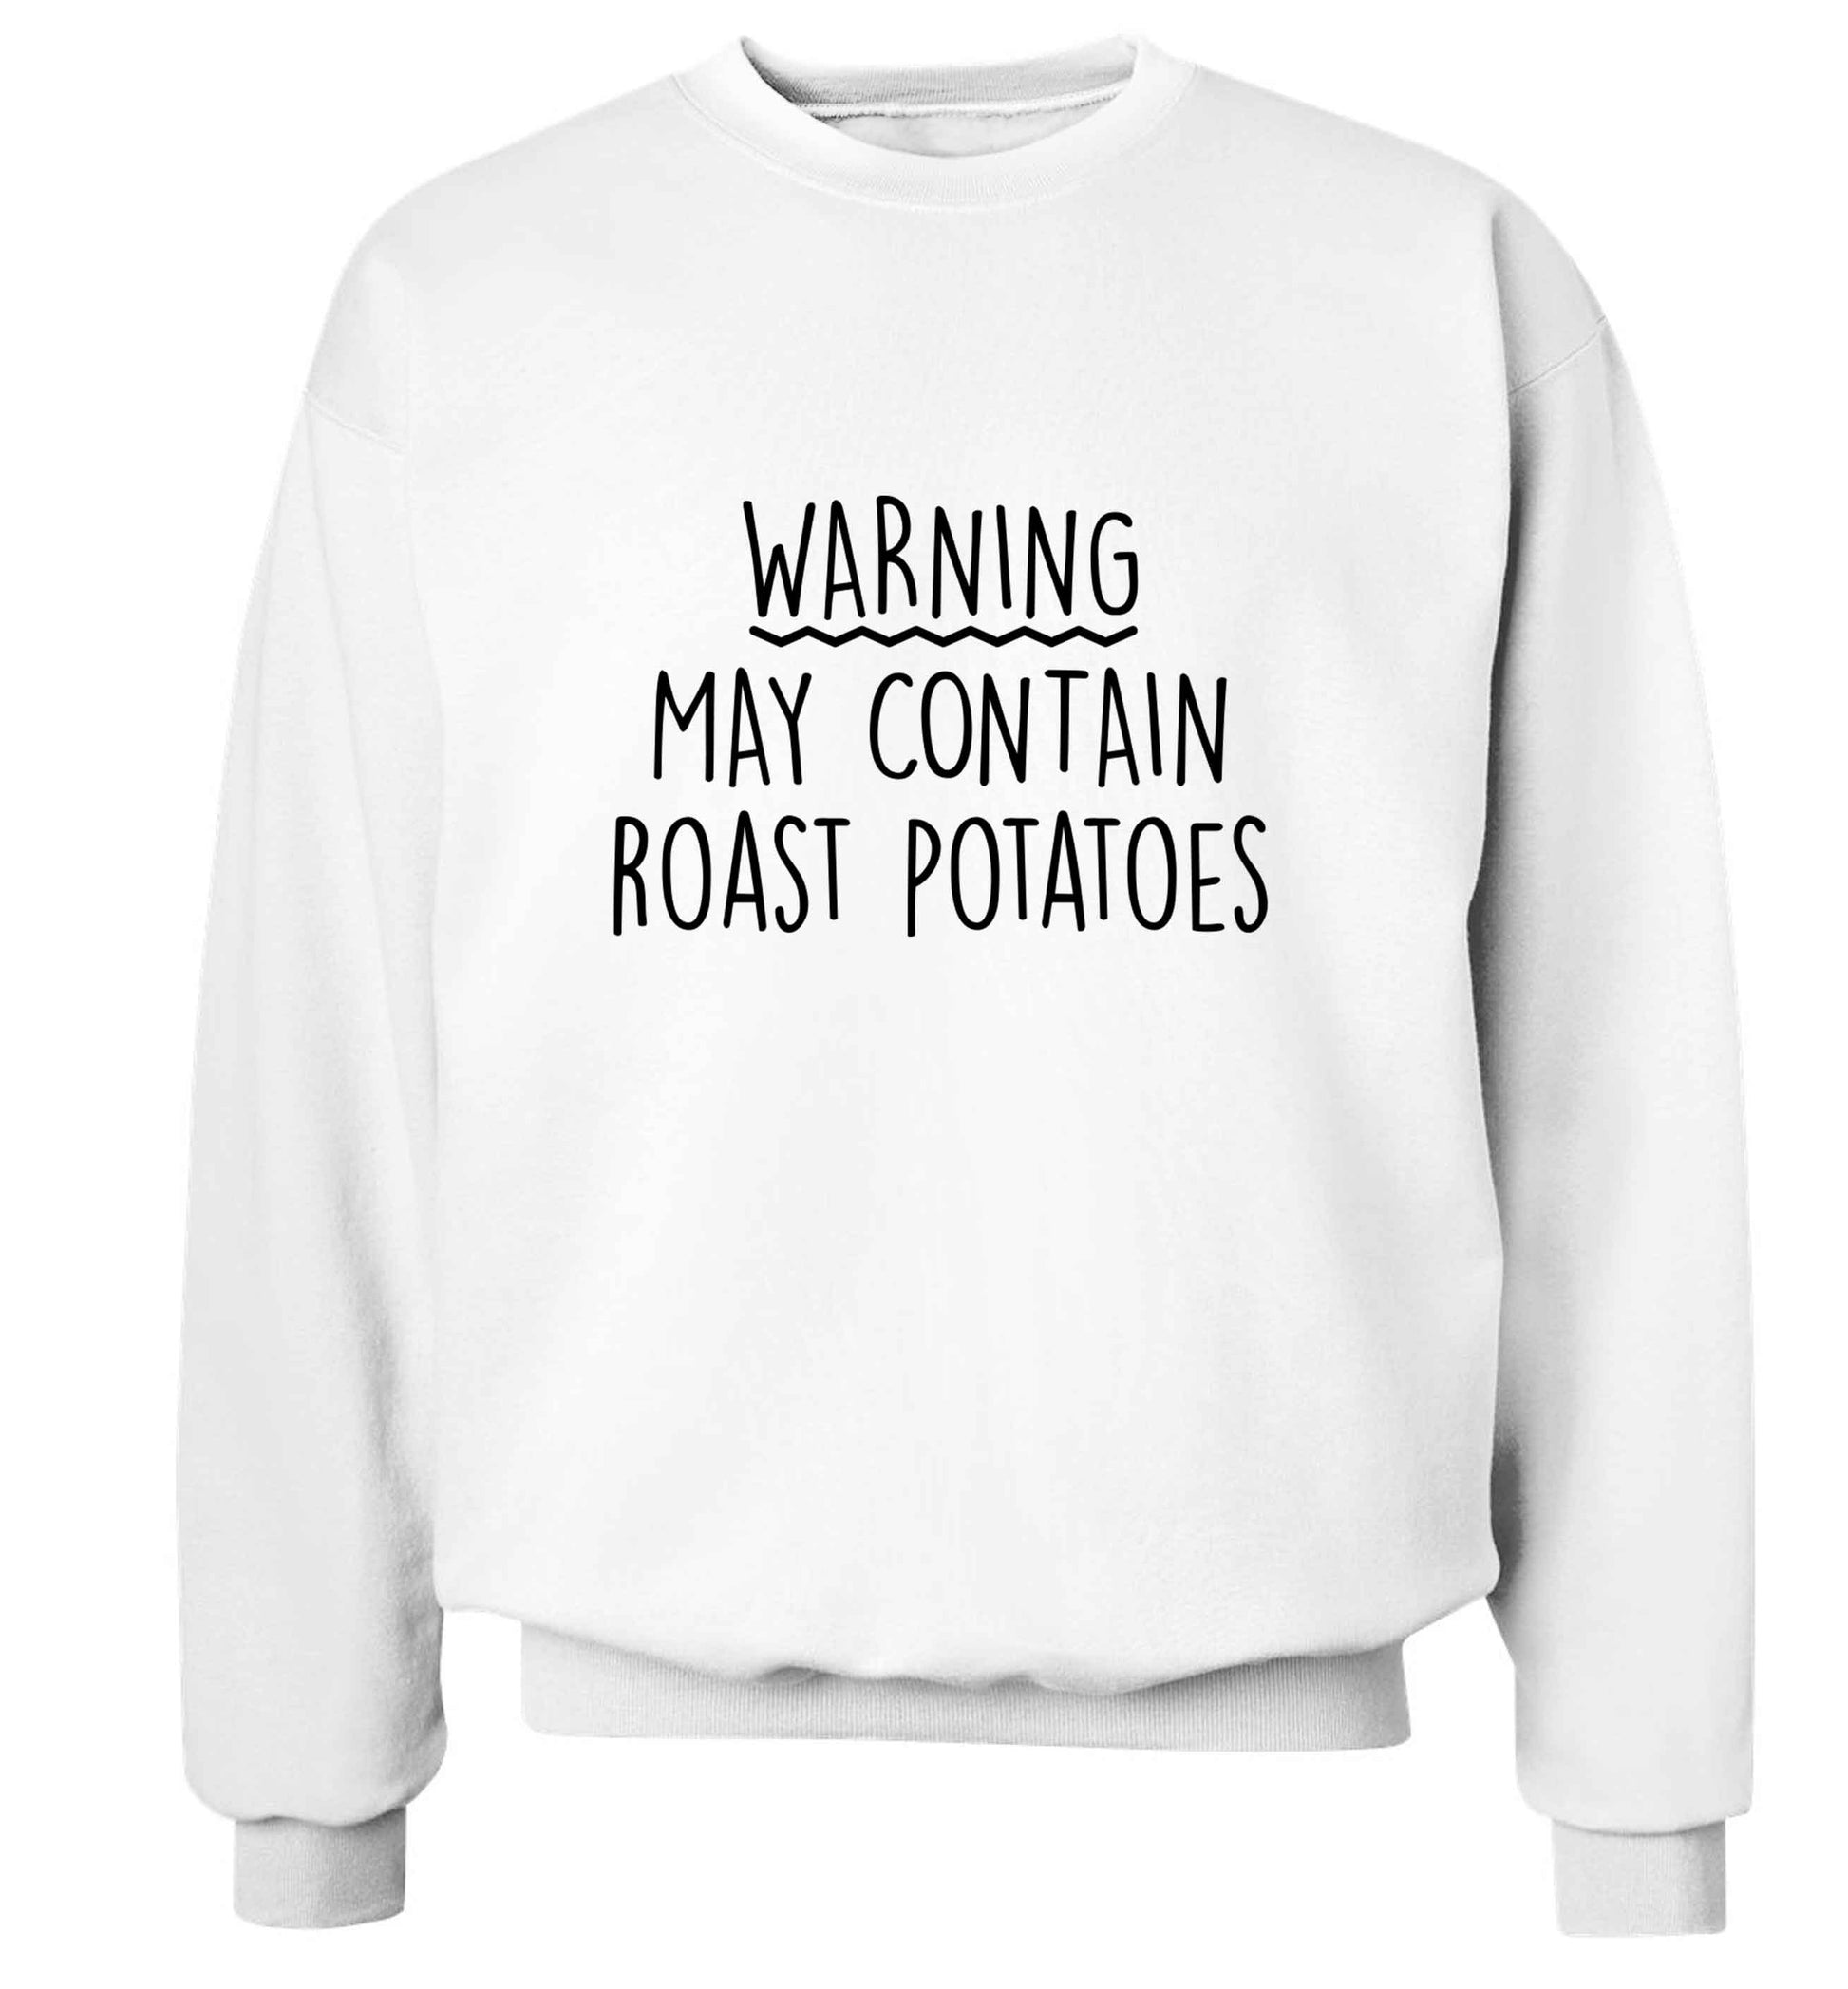 Warning may containg roast potatoes adult's unisex white sweater 2XL